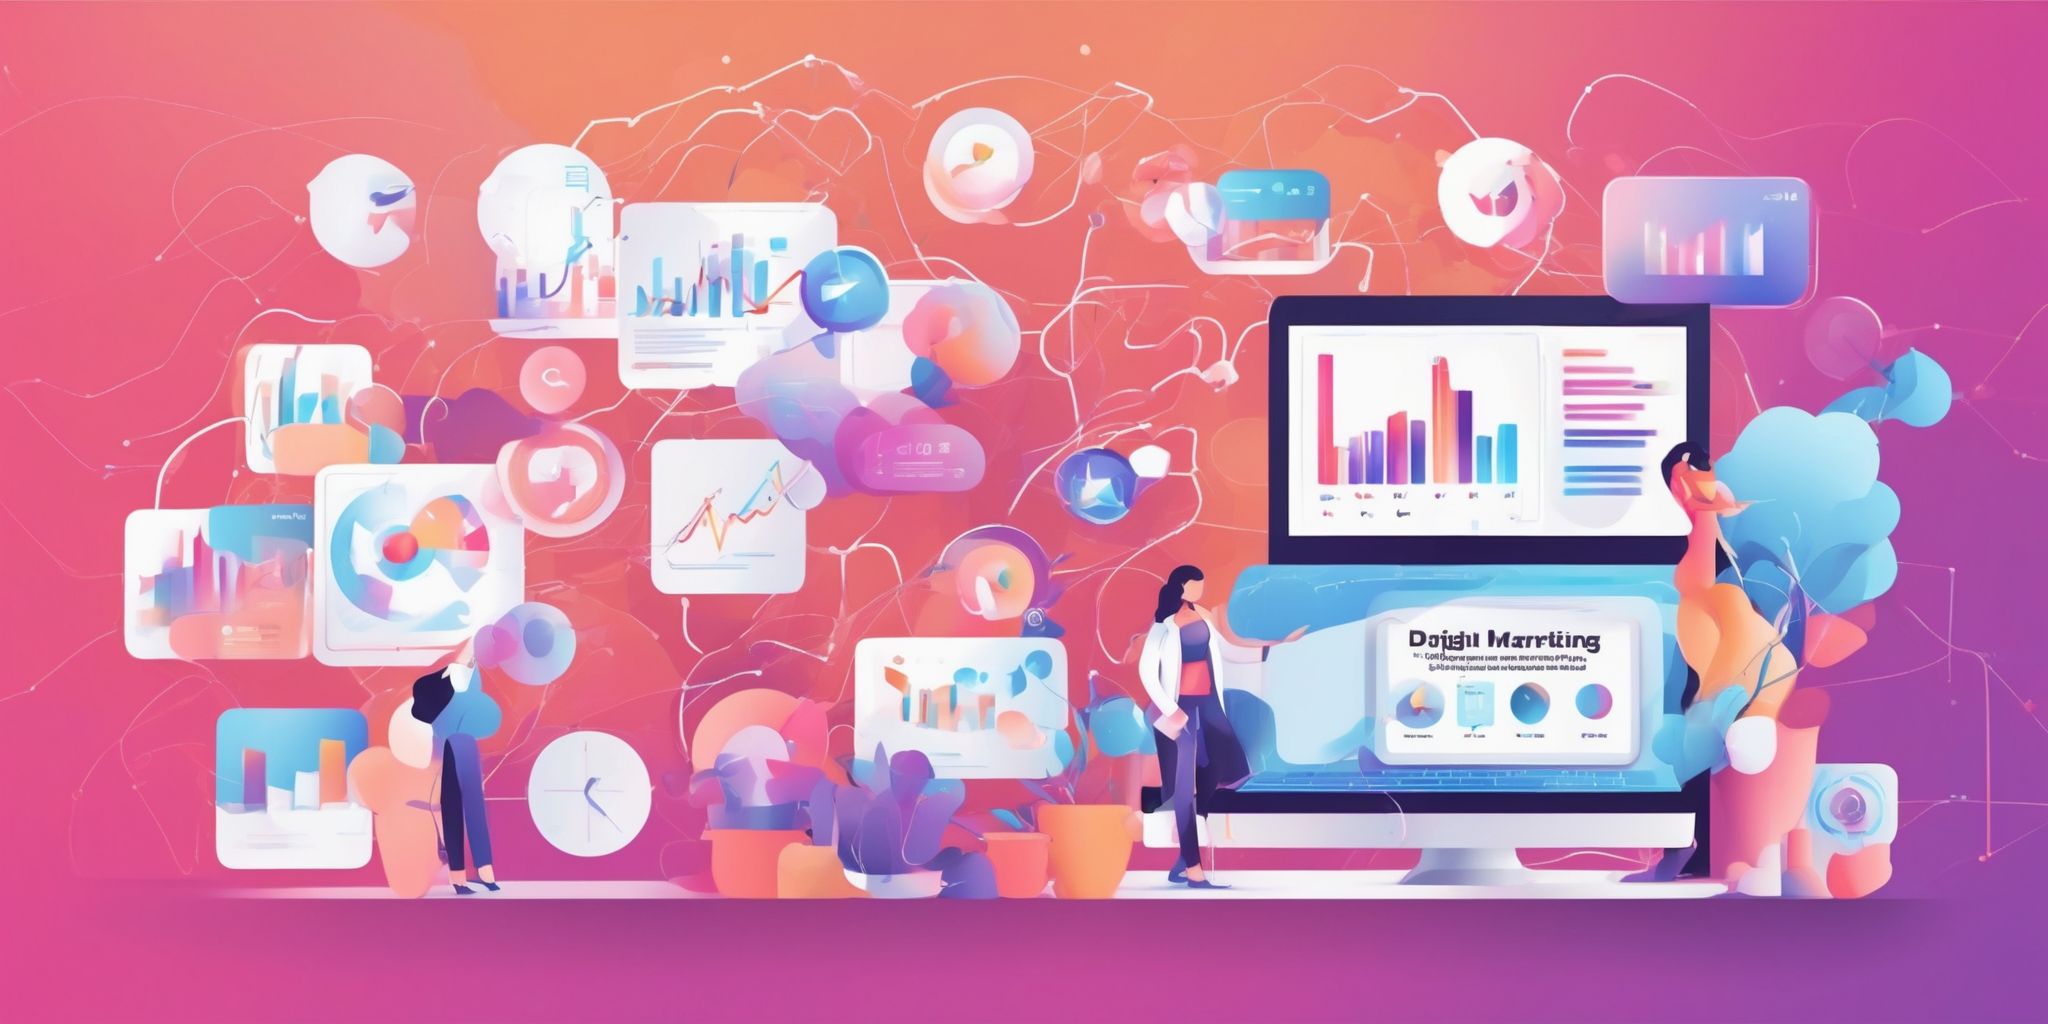 Digital marketing trends in illustration style with gradients and white background